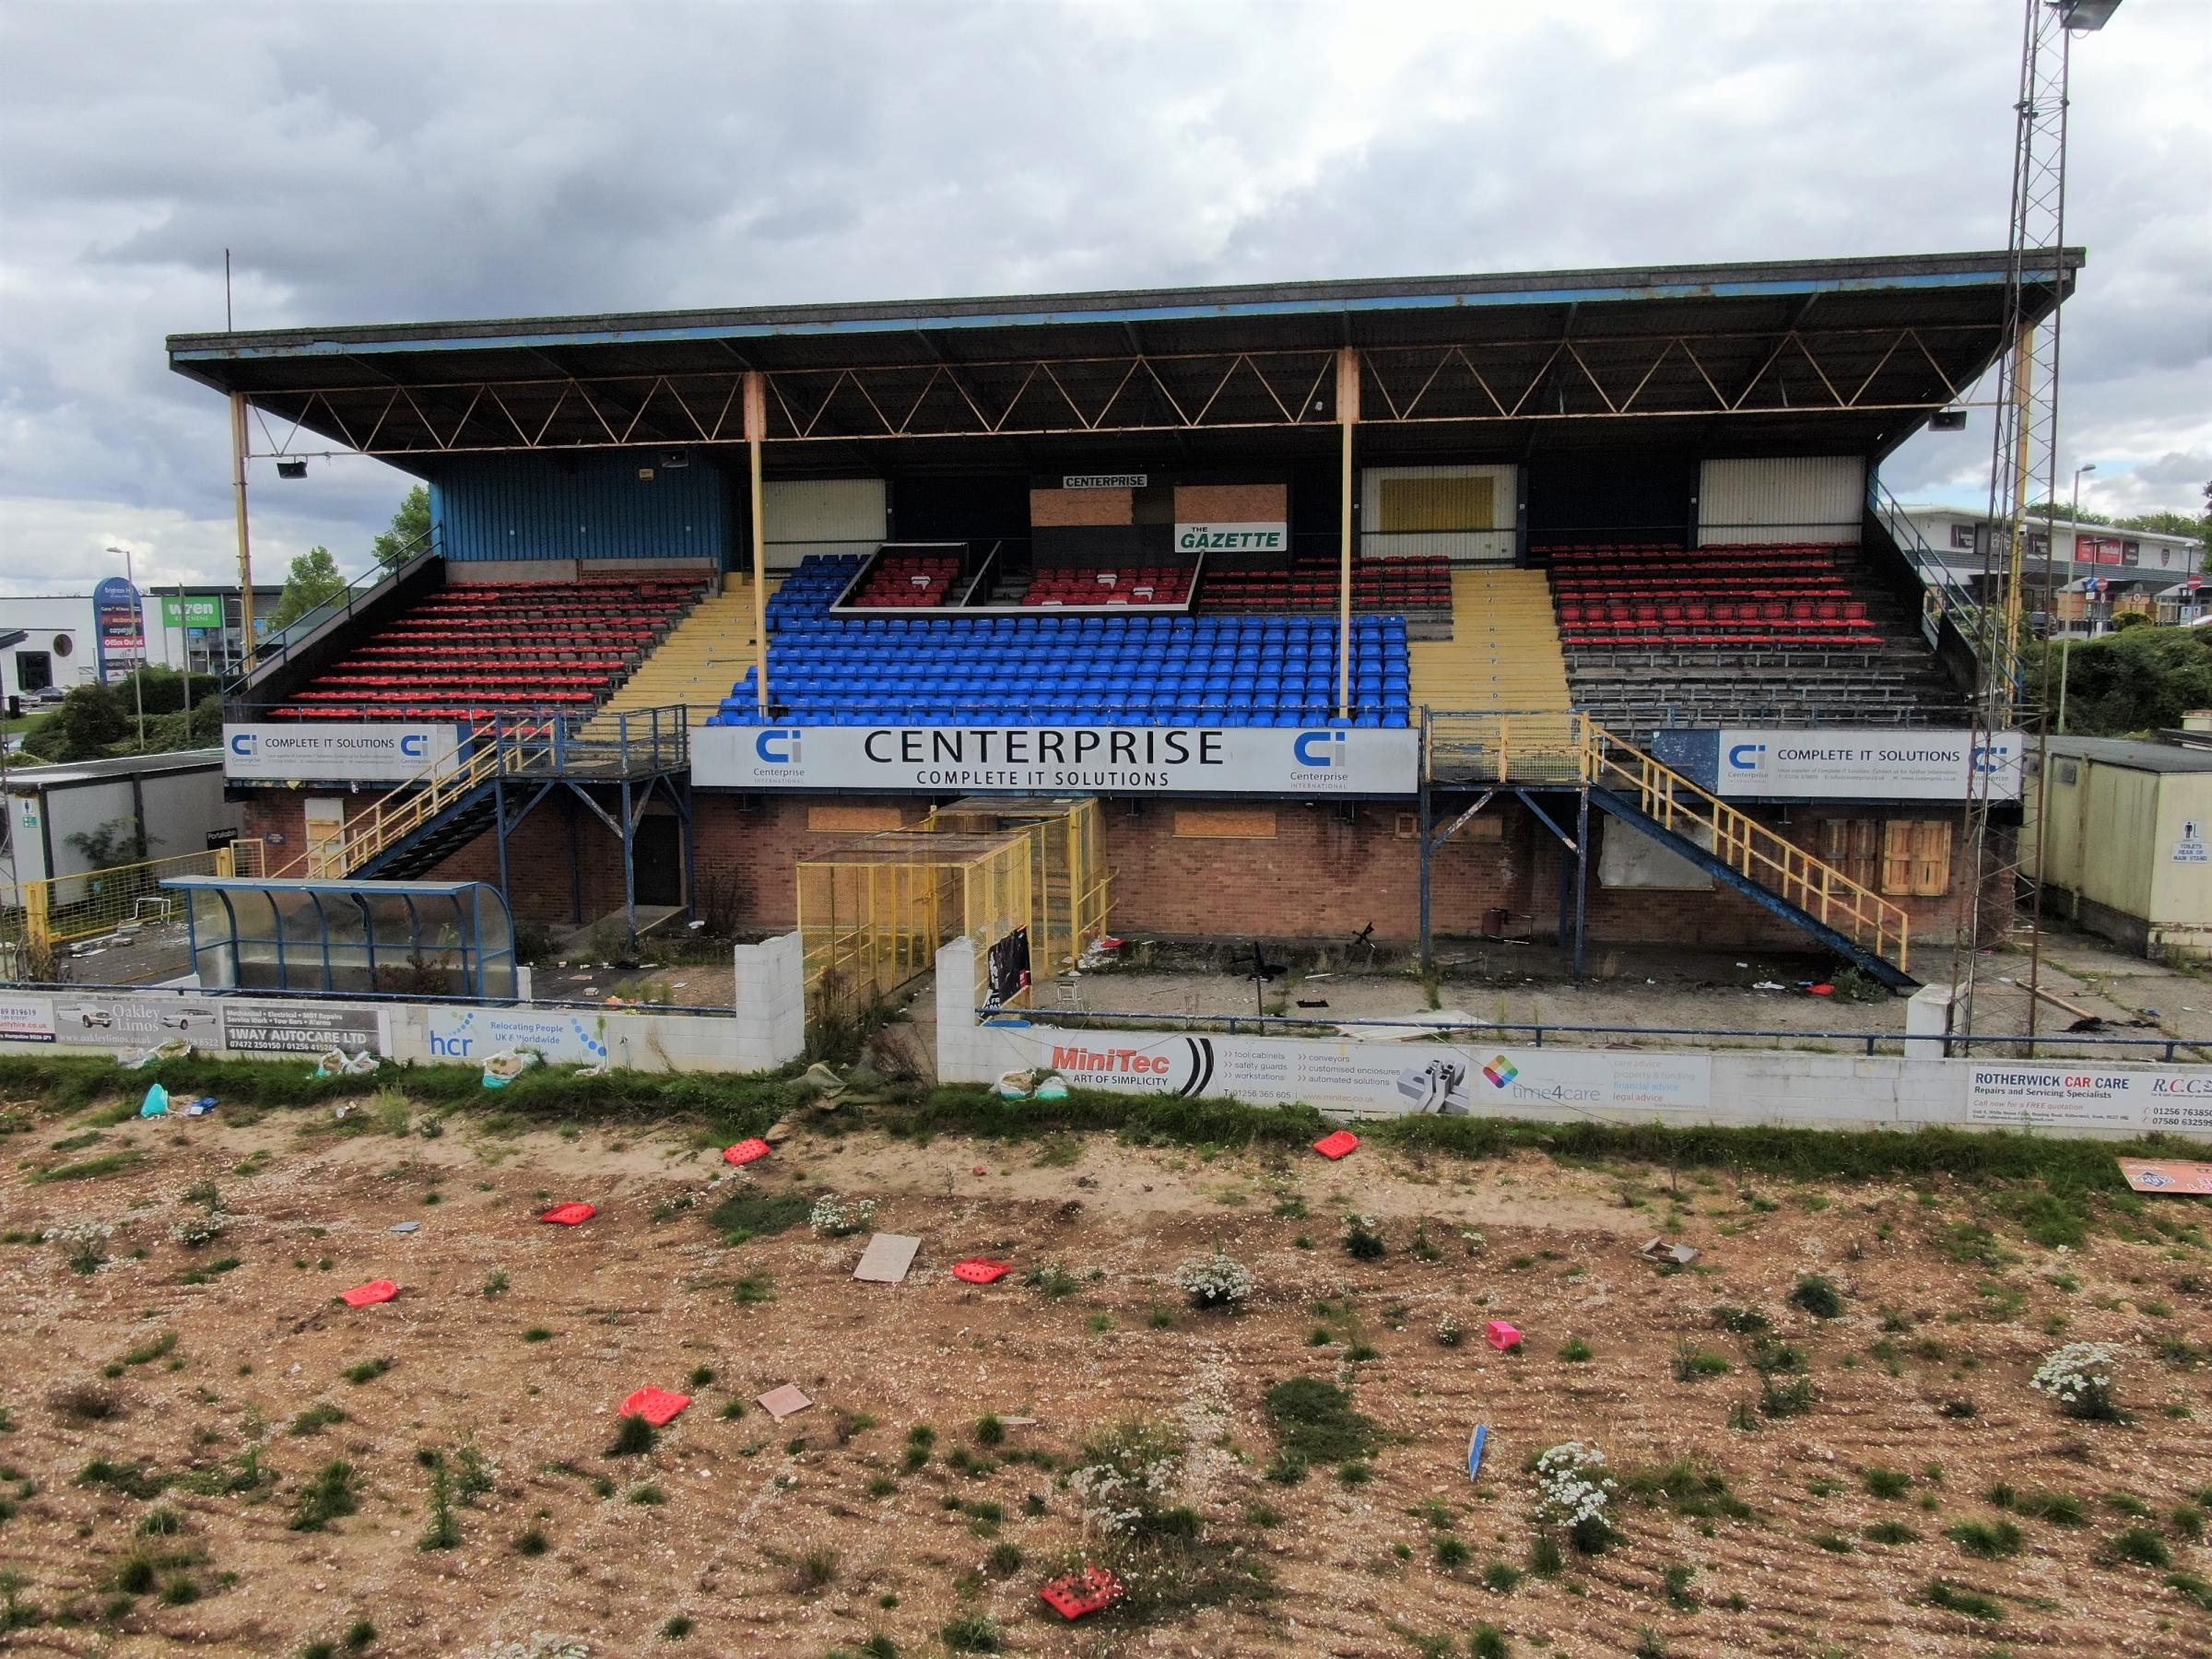 Photos show the Camrose left in a horrendous state. Picture by Simon Hill 